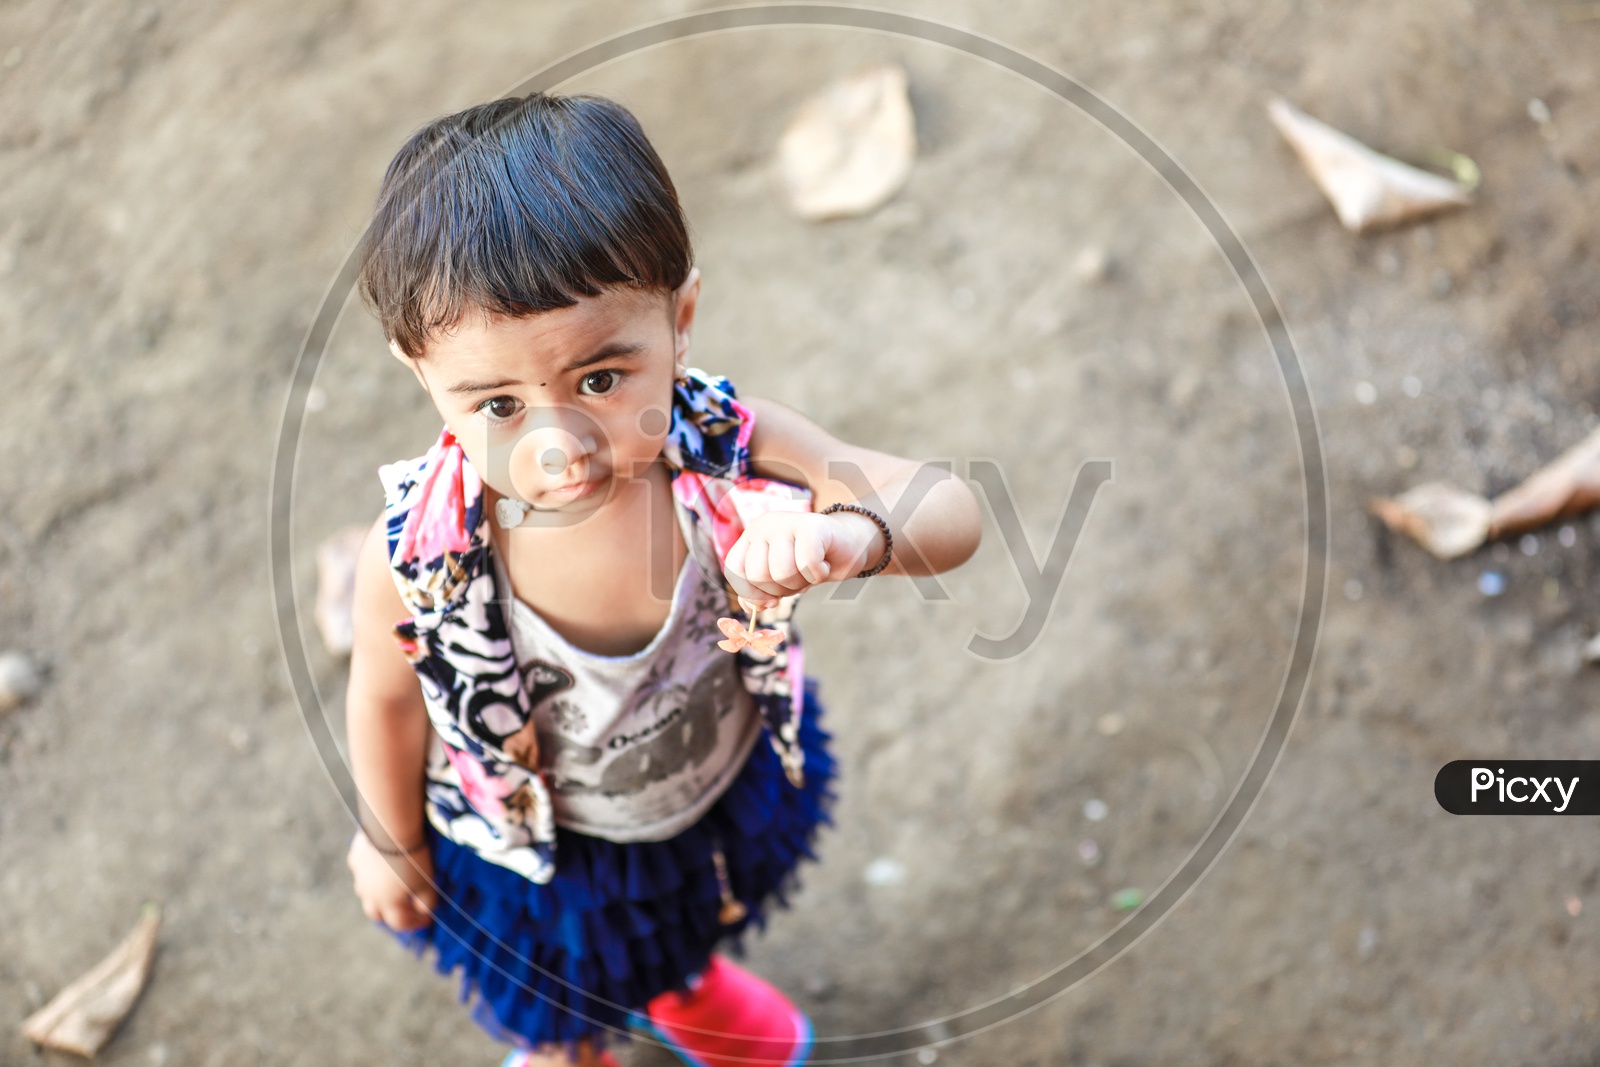 Cute Indian Girl Child Or Baby Girl Playing in a Park